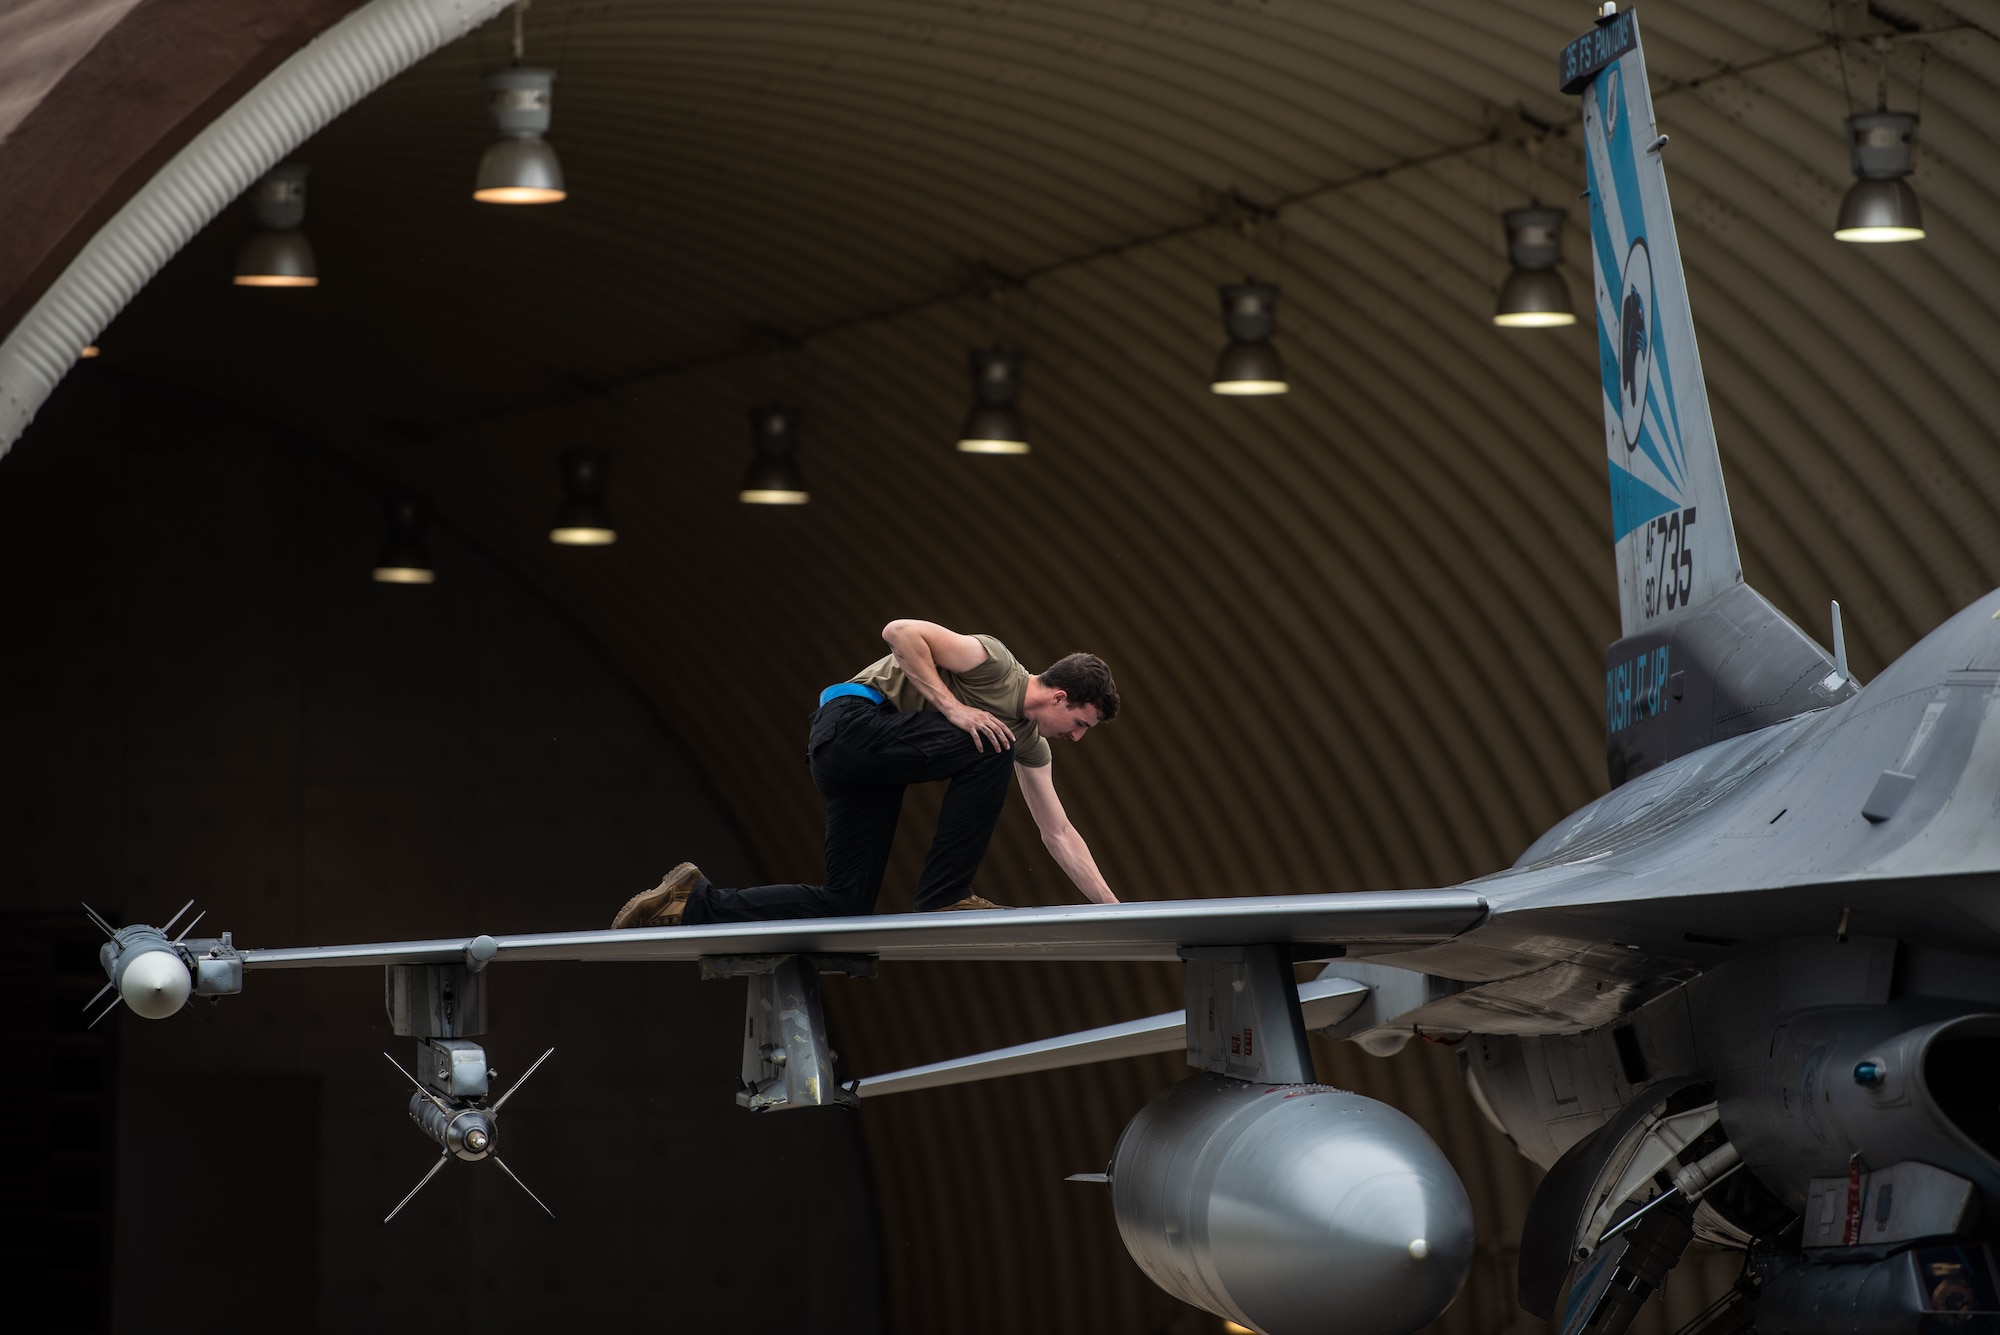 An aircraft maintainer kneels on the wing of an aircraft